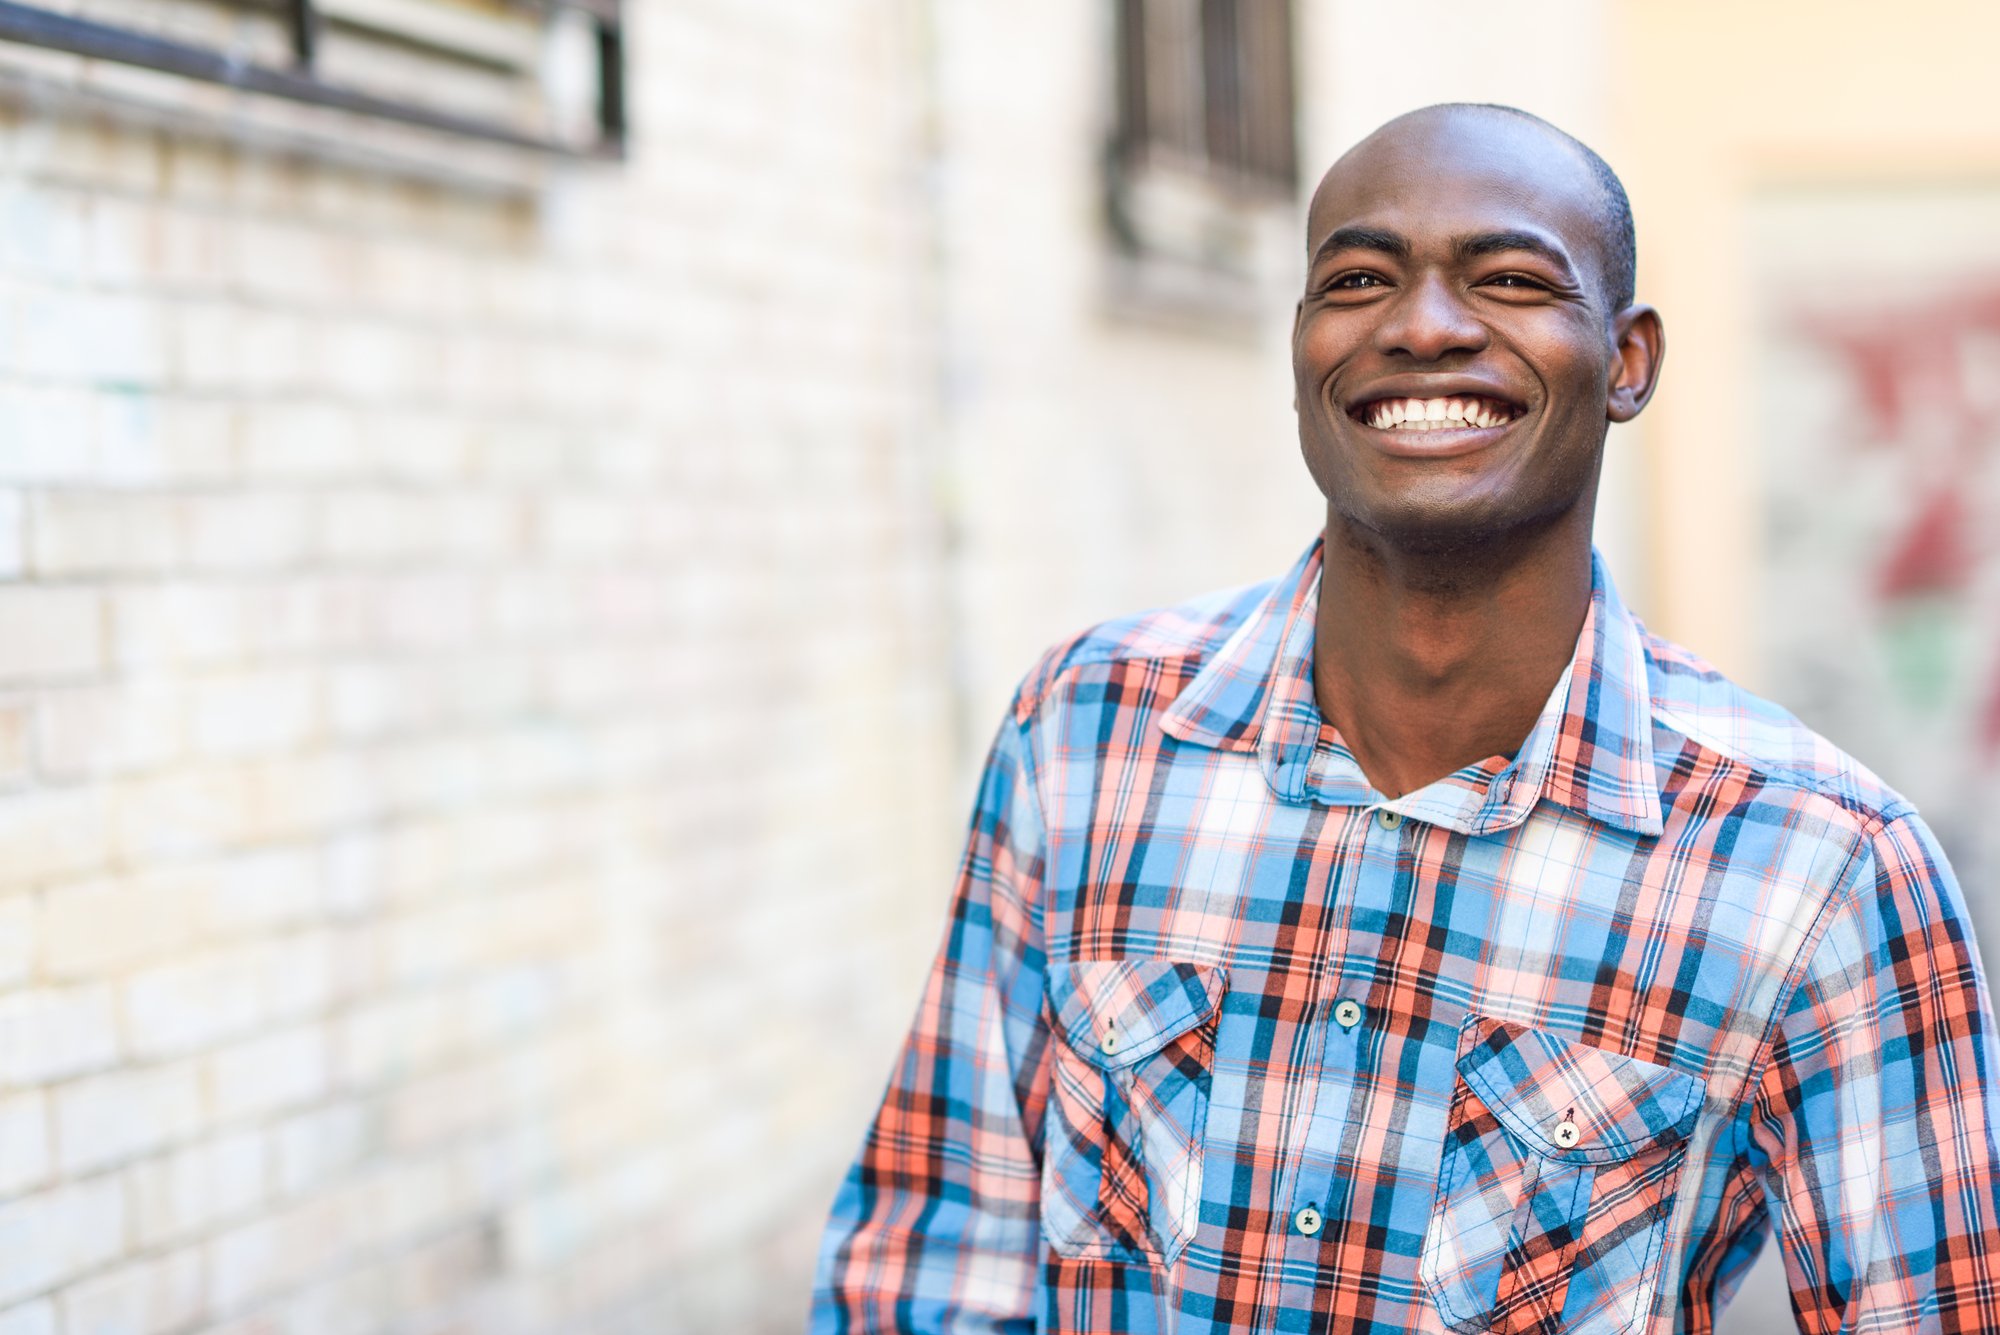 Black man wearing casual clothes in urban background